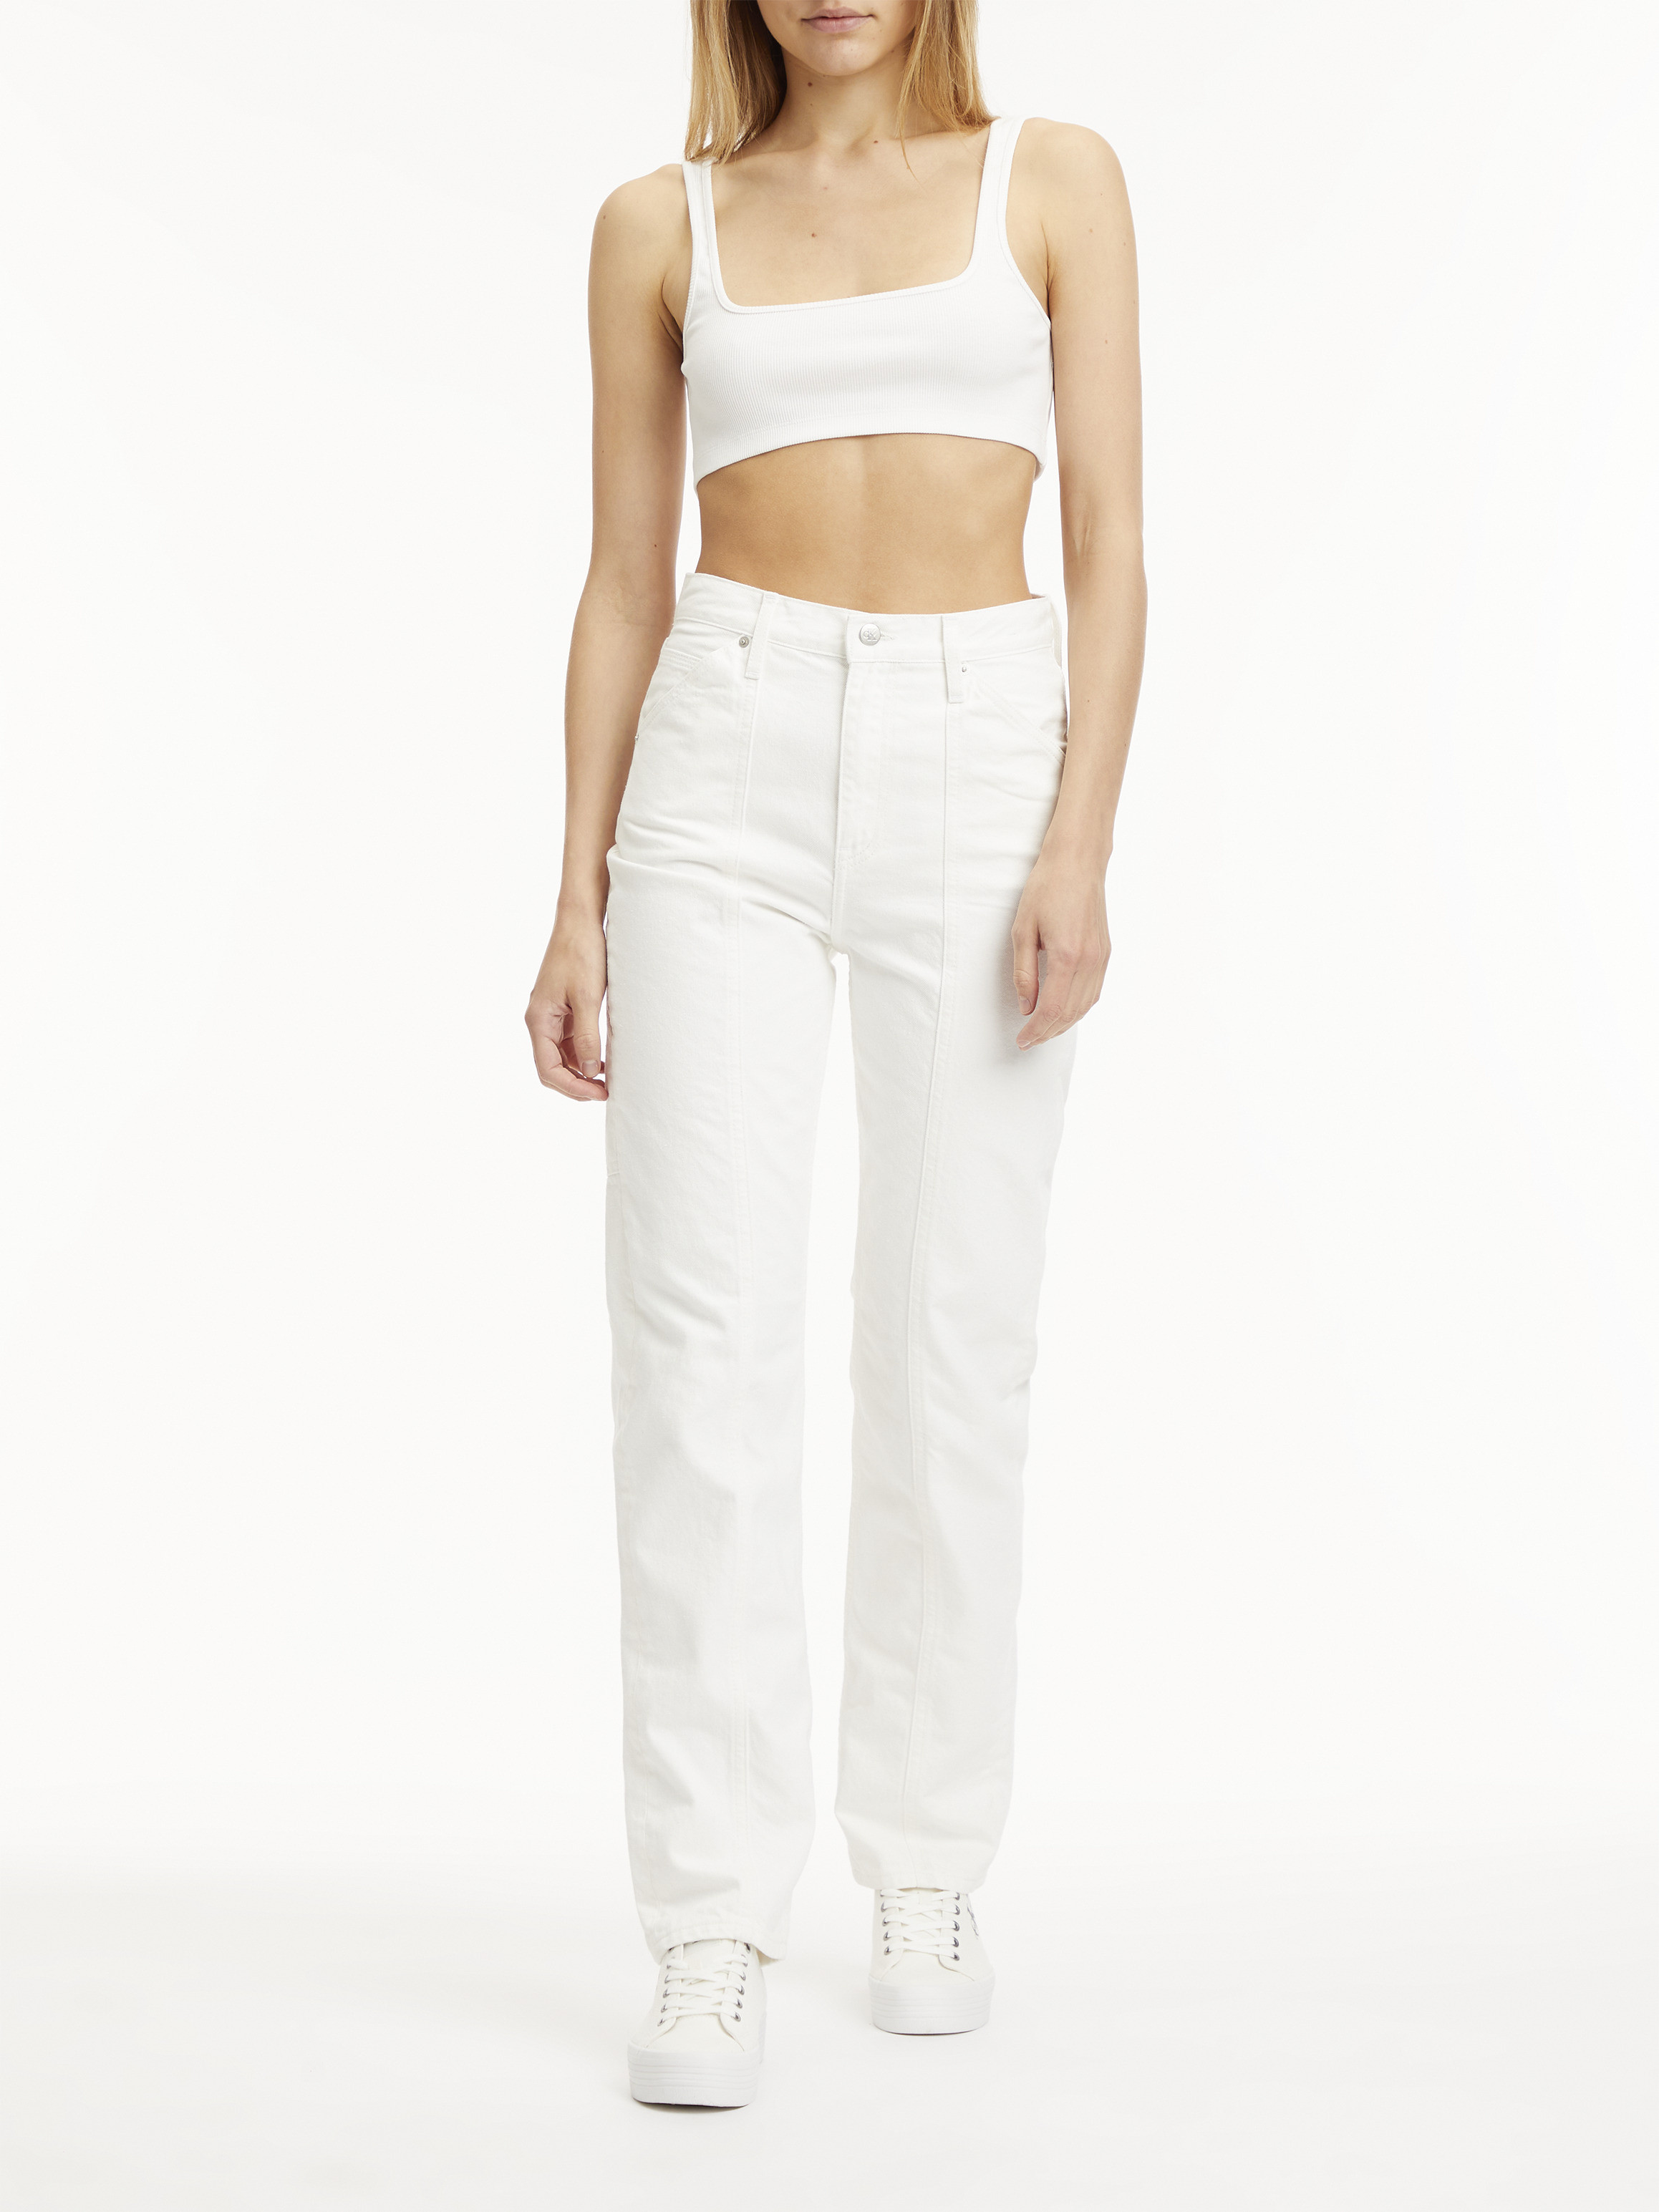 Calvin Klein Jeans - Jeans dritti in cotone, Bianco, large image number 2